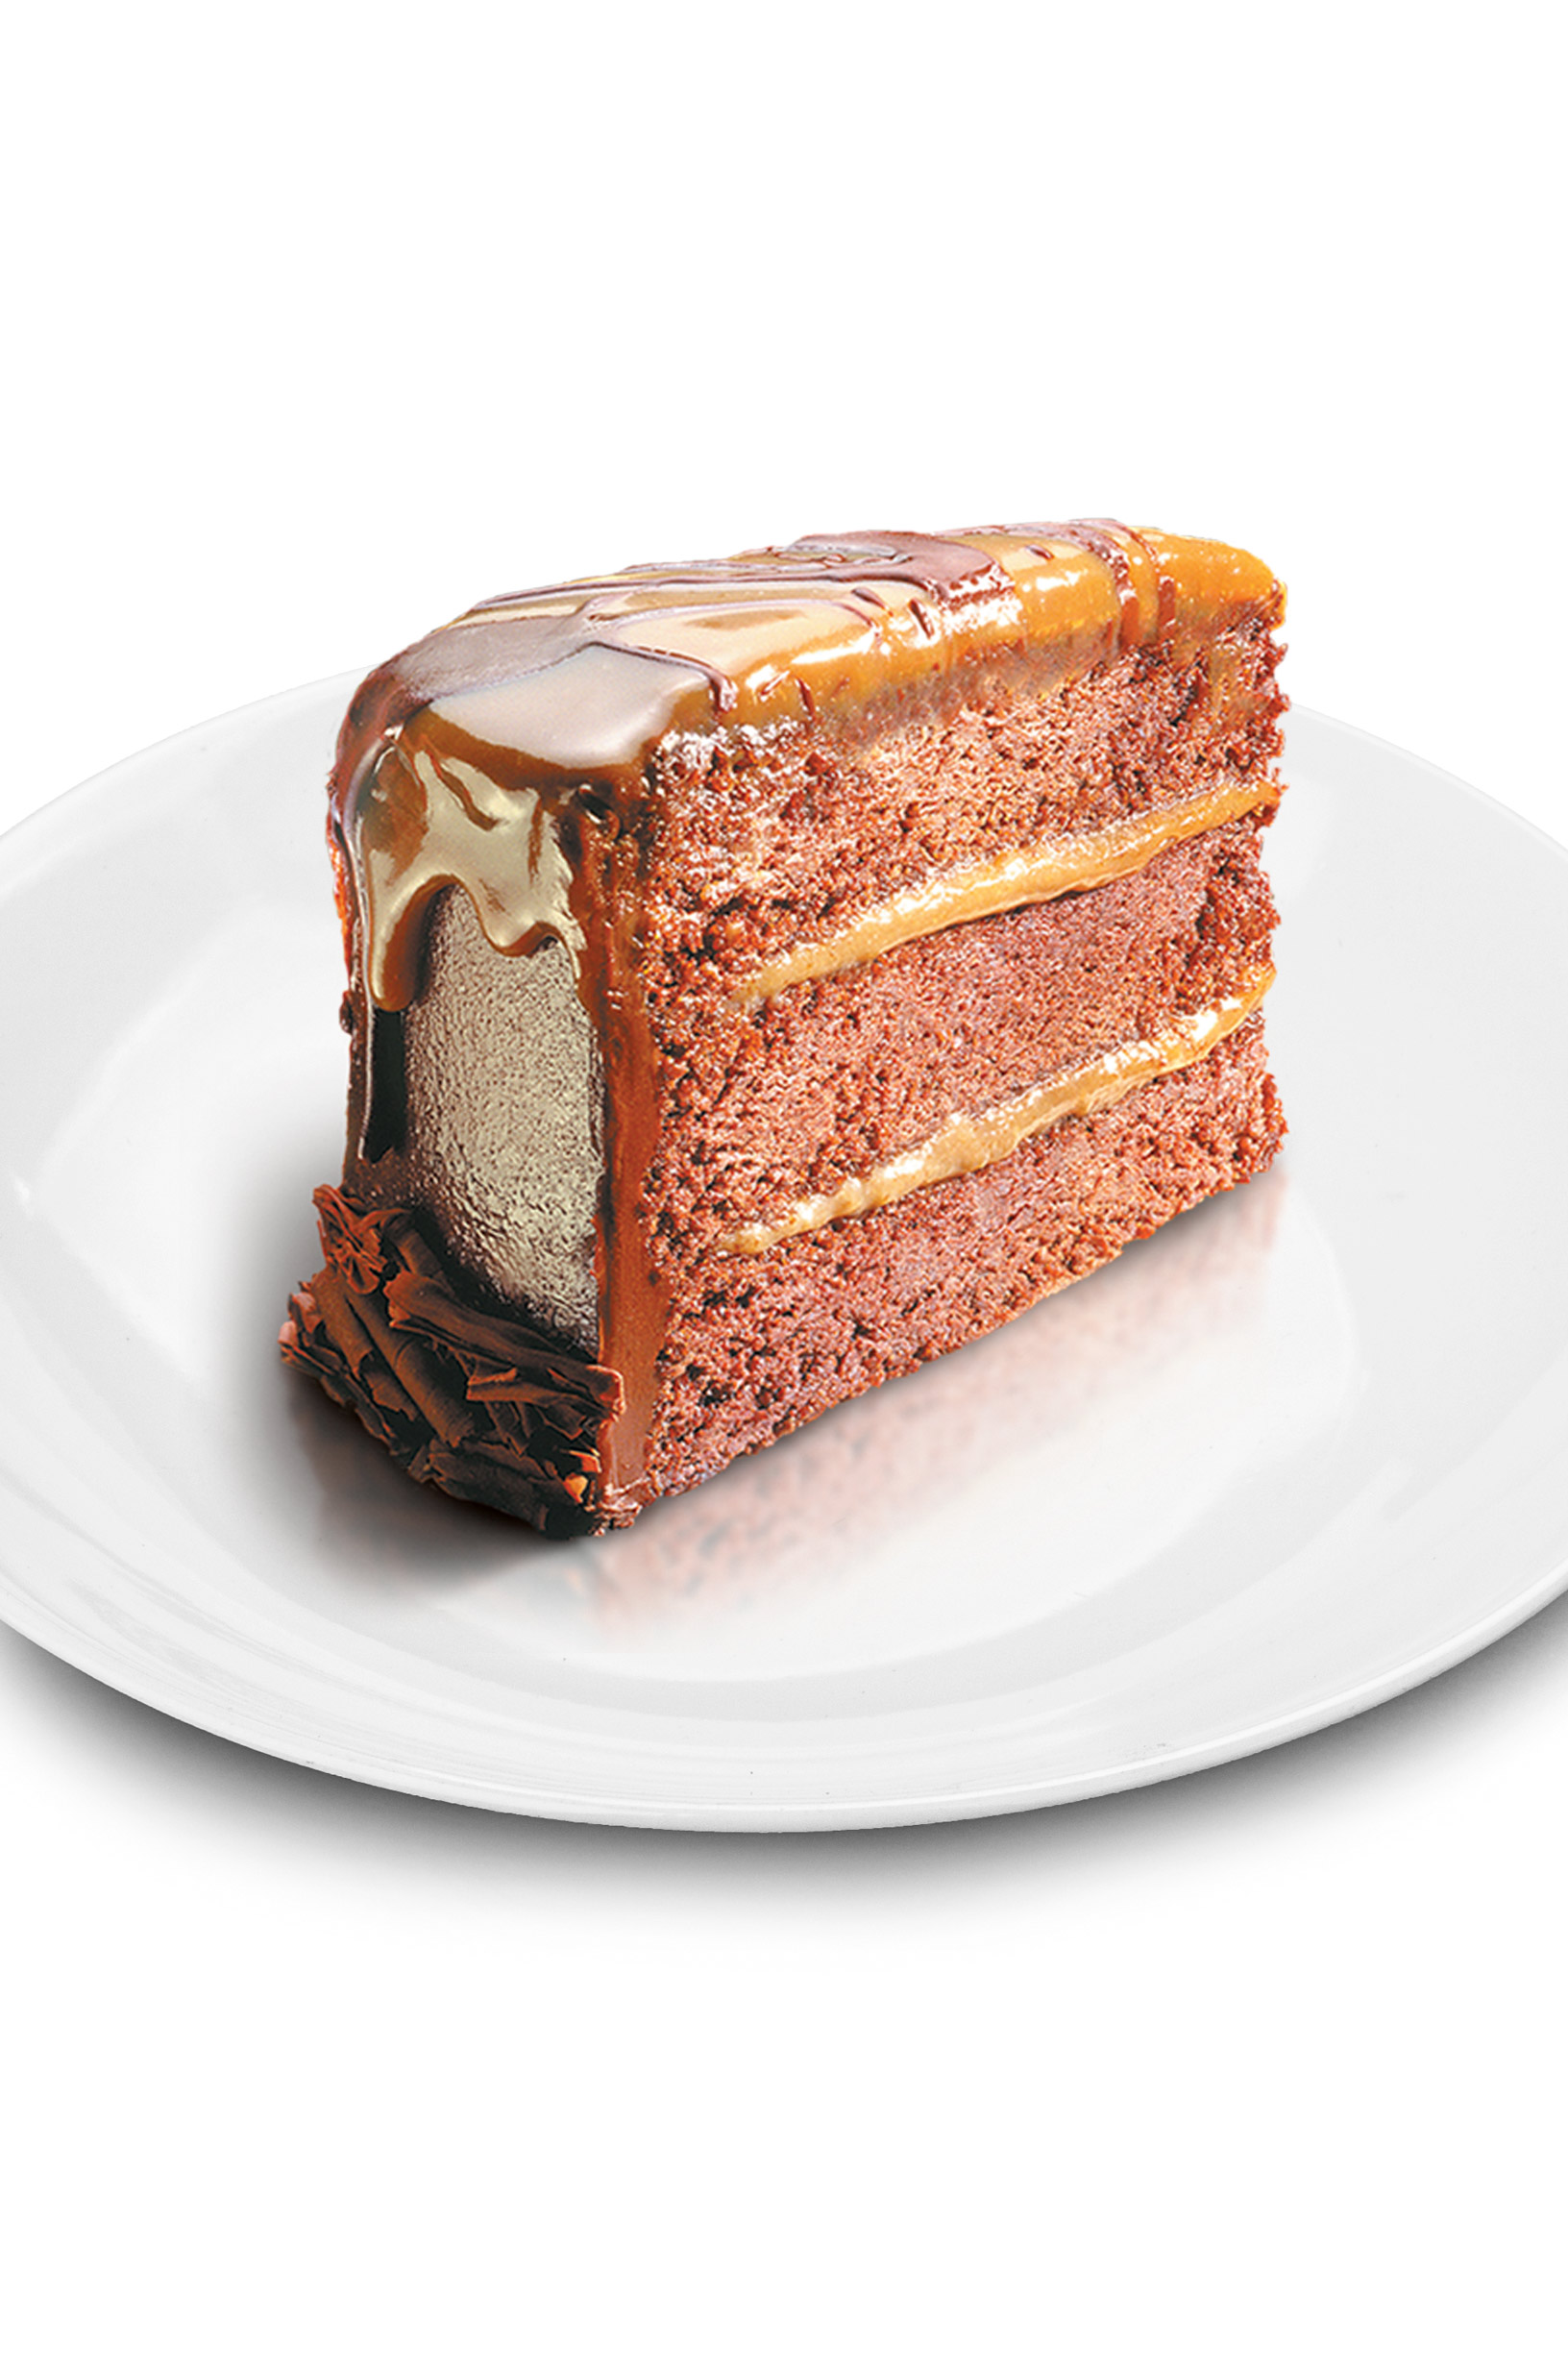 Chocolate Caramel Cake-white-plate-isolated-verticle